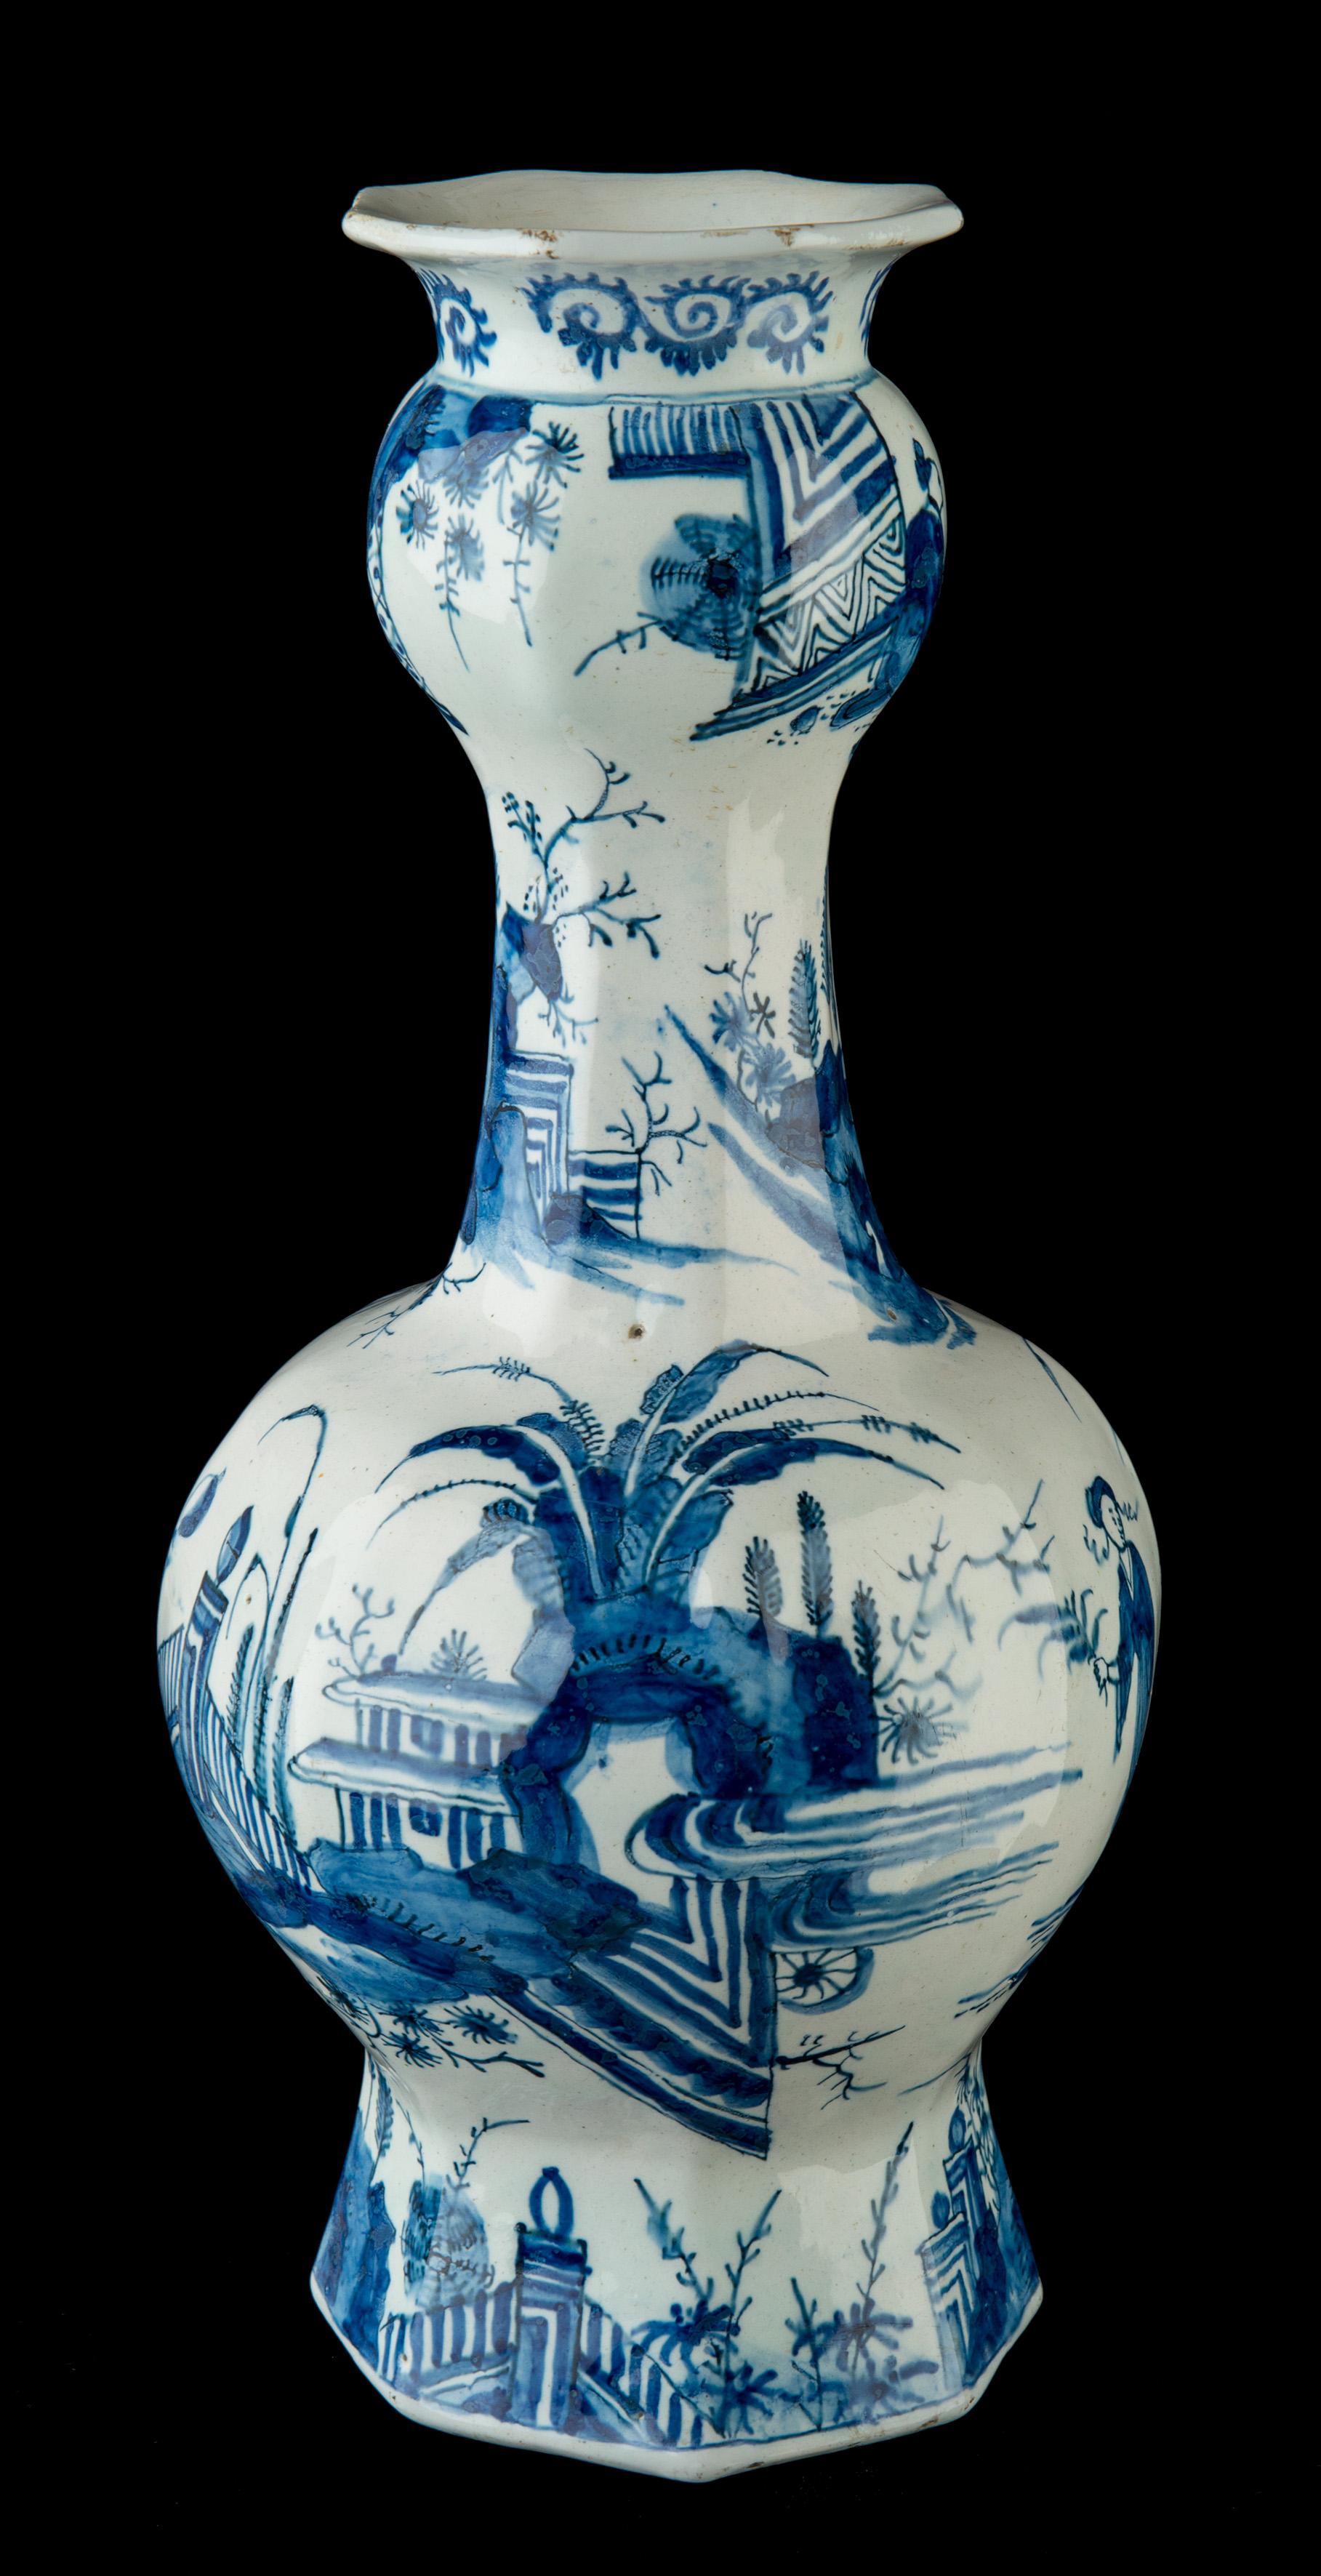 Baroque Delft, Pair of Blue and White Garlic-Head Bottle Vases, circa 1700